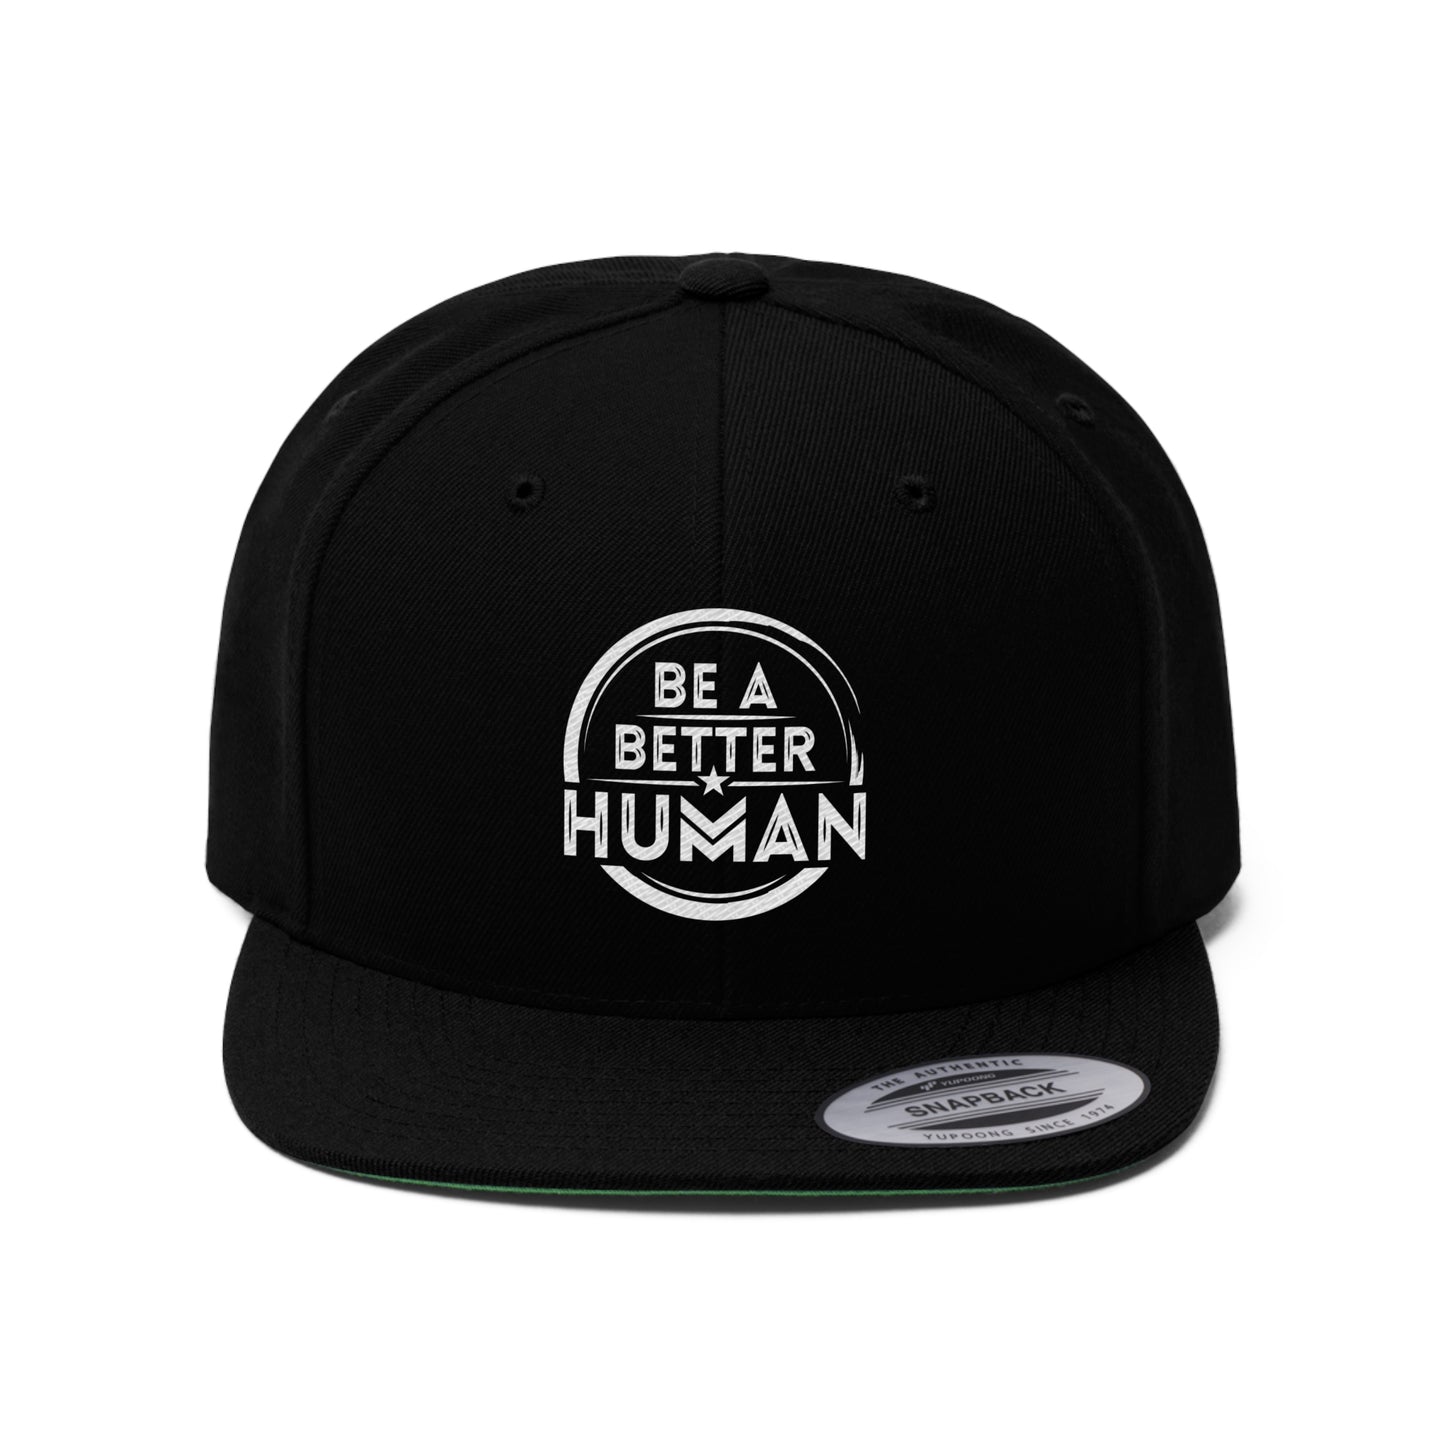 Be a Better Human™ Snap Back Hat - Black and White